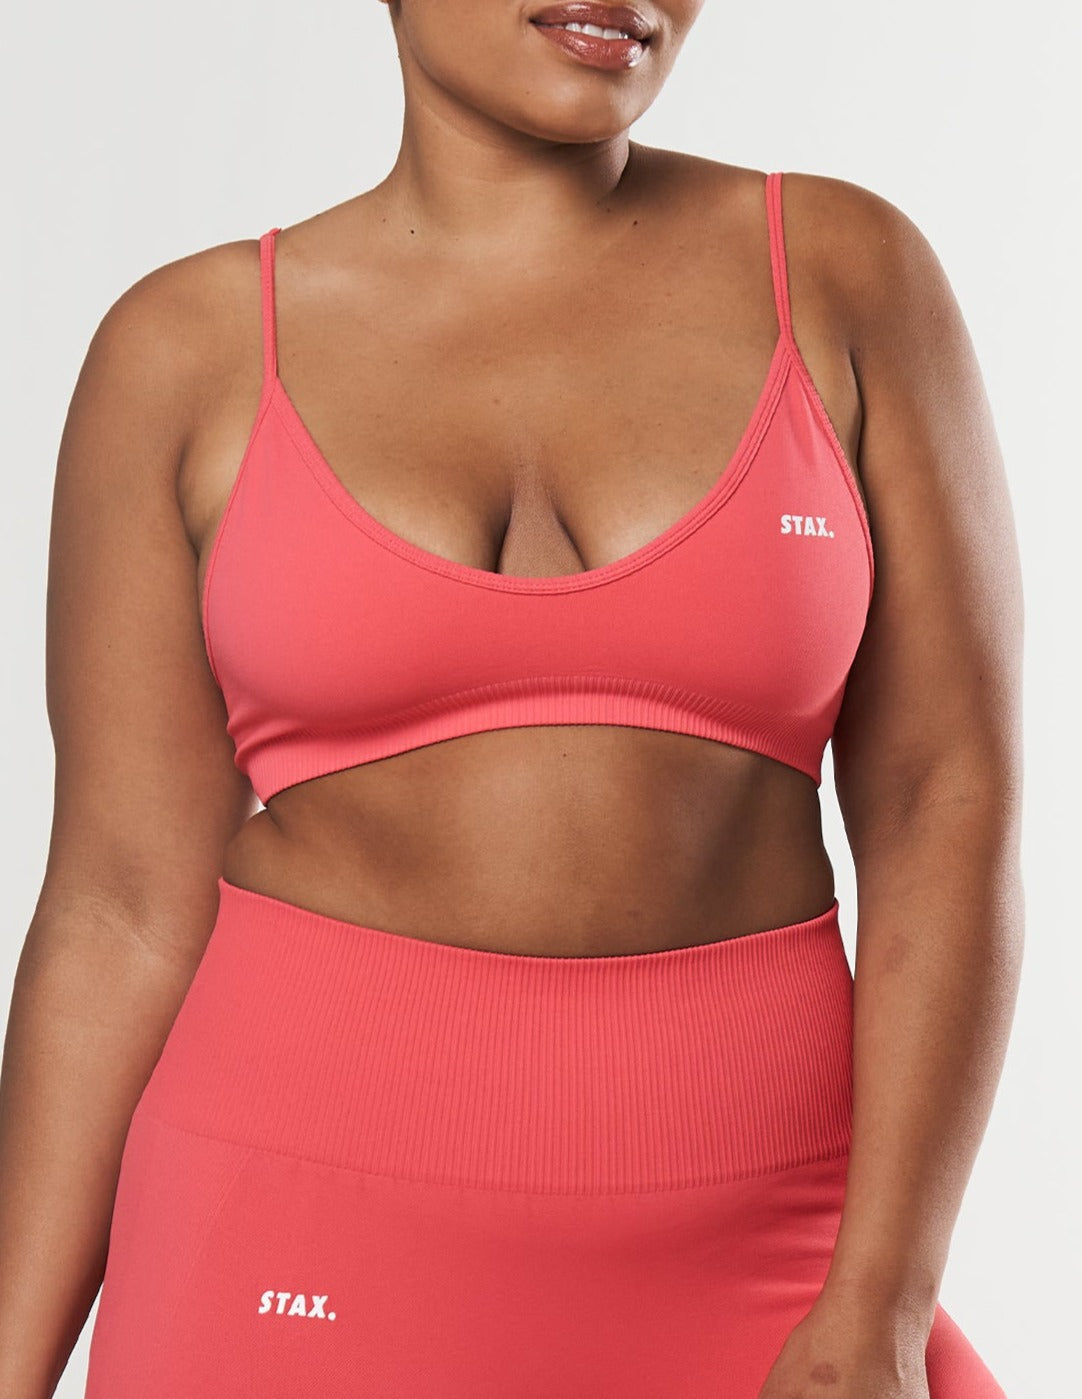 stax-ps-bralette-pink